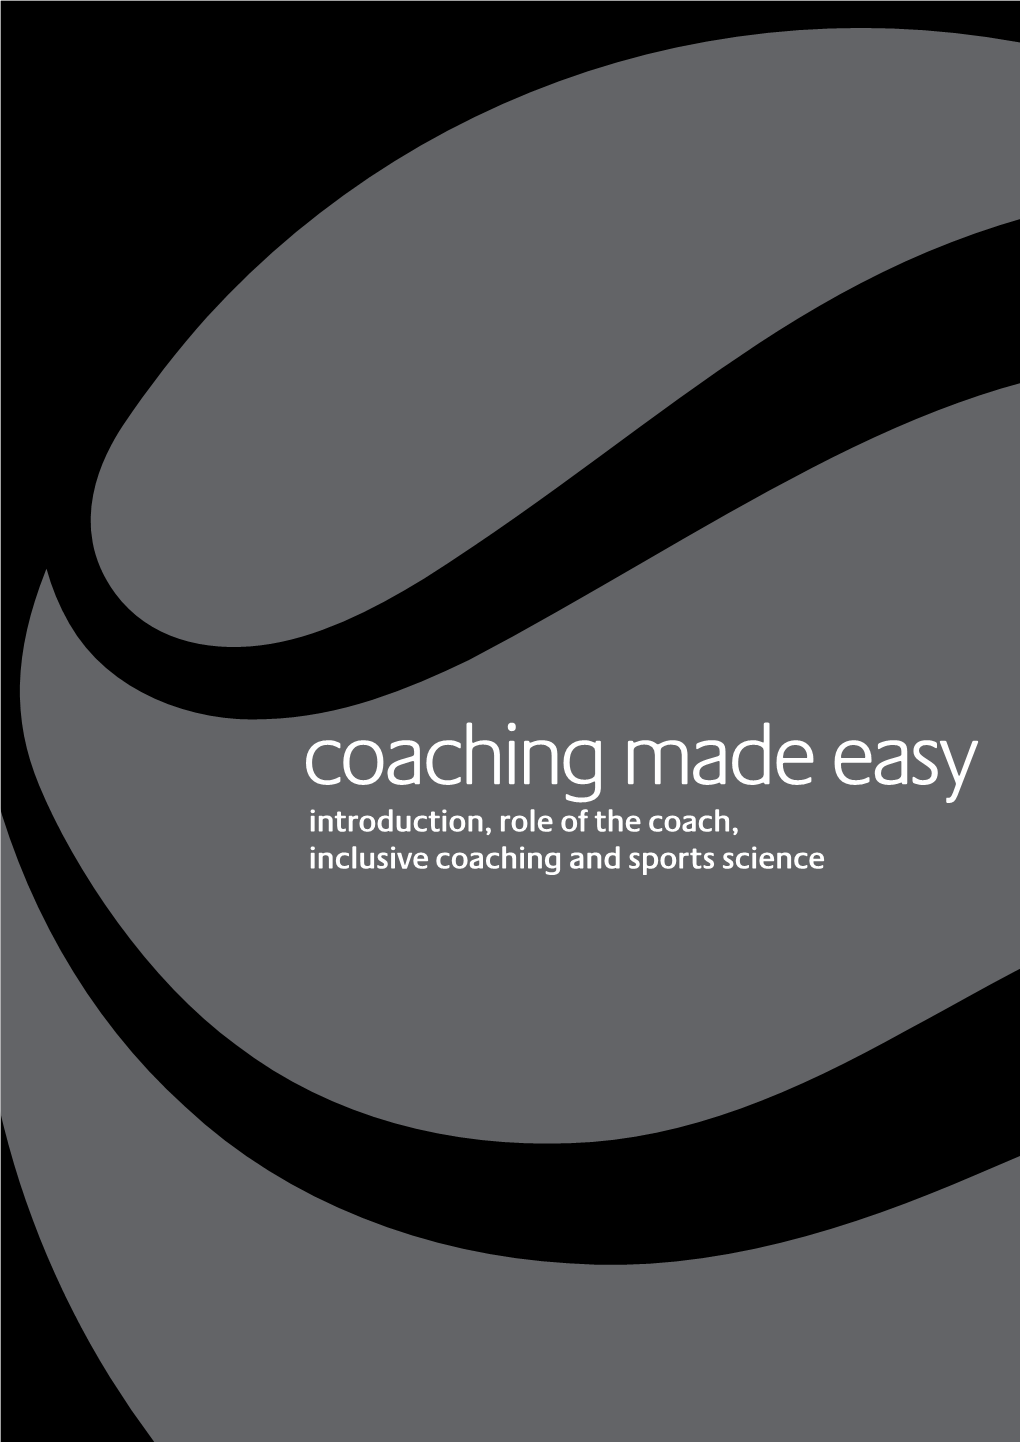 Coaching Made Easy Introduction, Role of the Coach, Inclusive Coaching and Sports Science Introduction, Role of the Coach, Inclusive Coaching & Sports Science